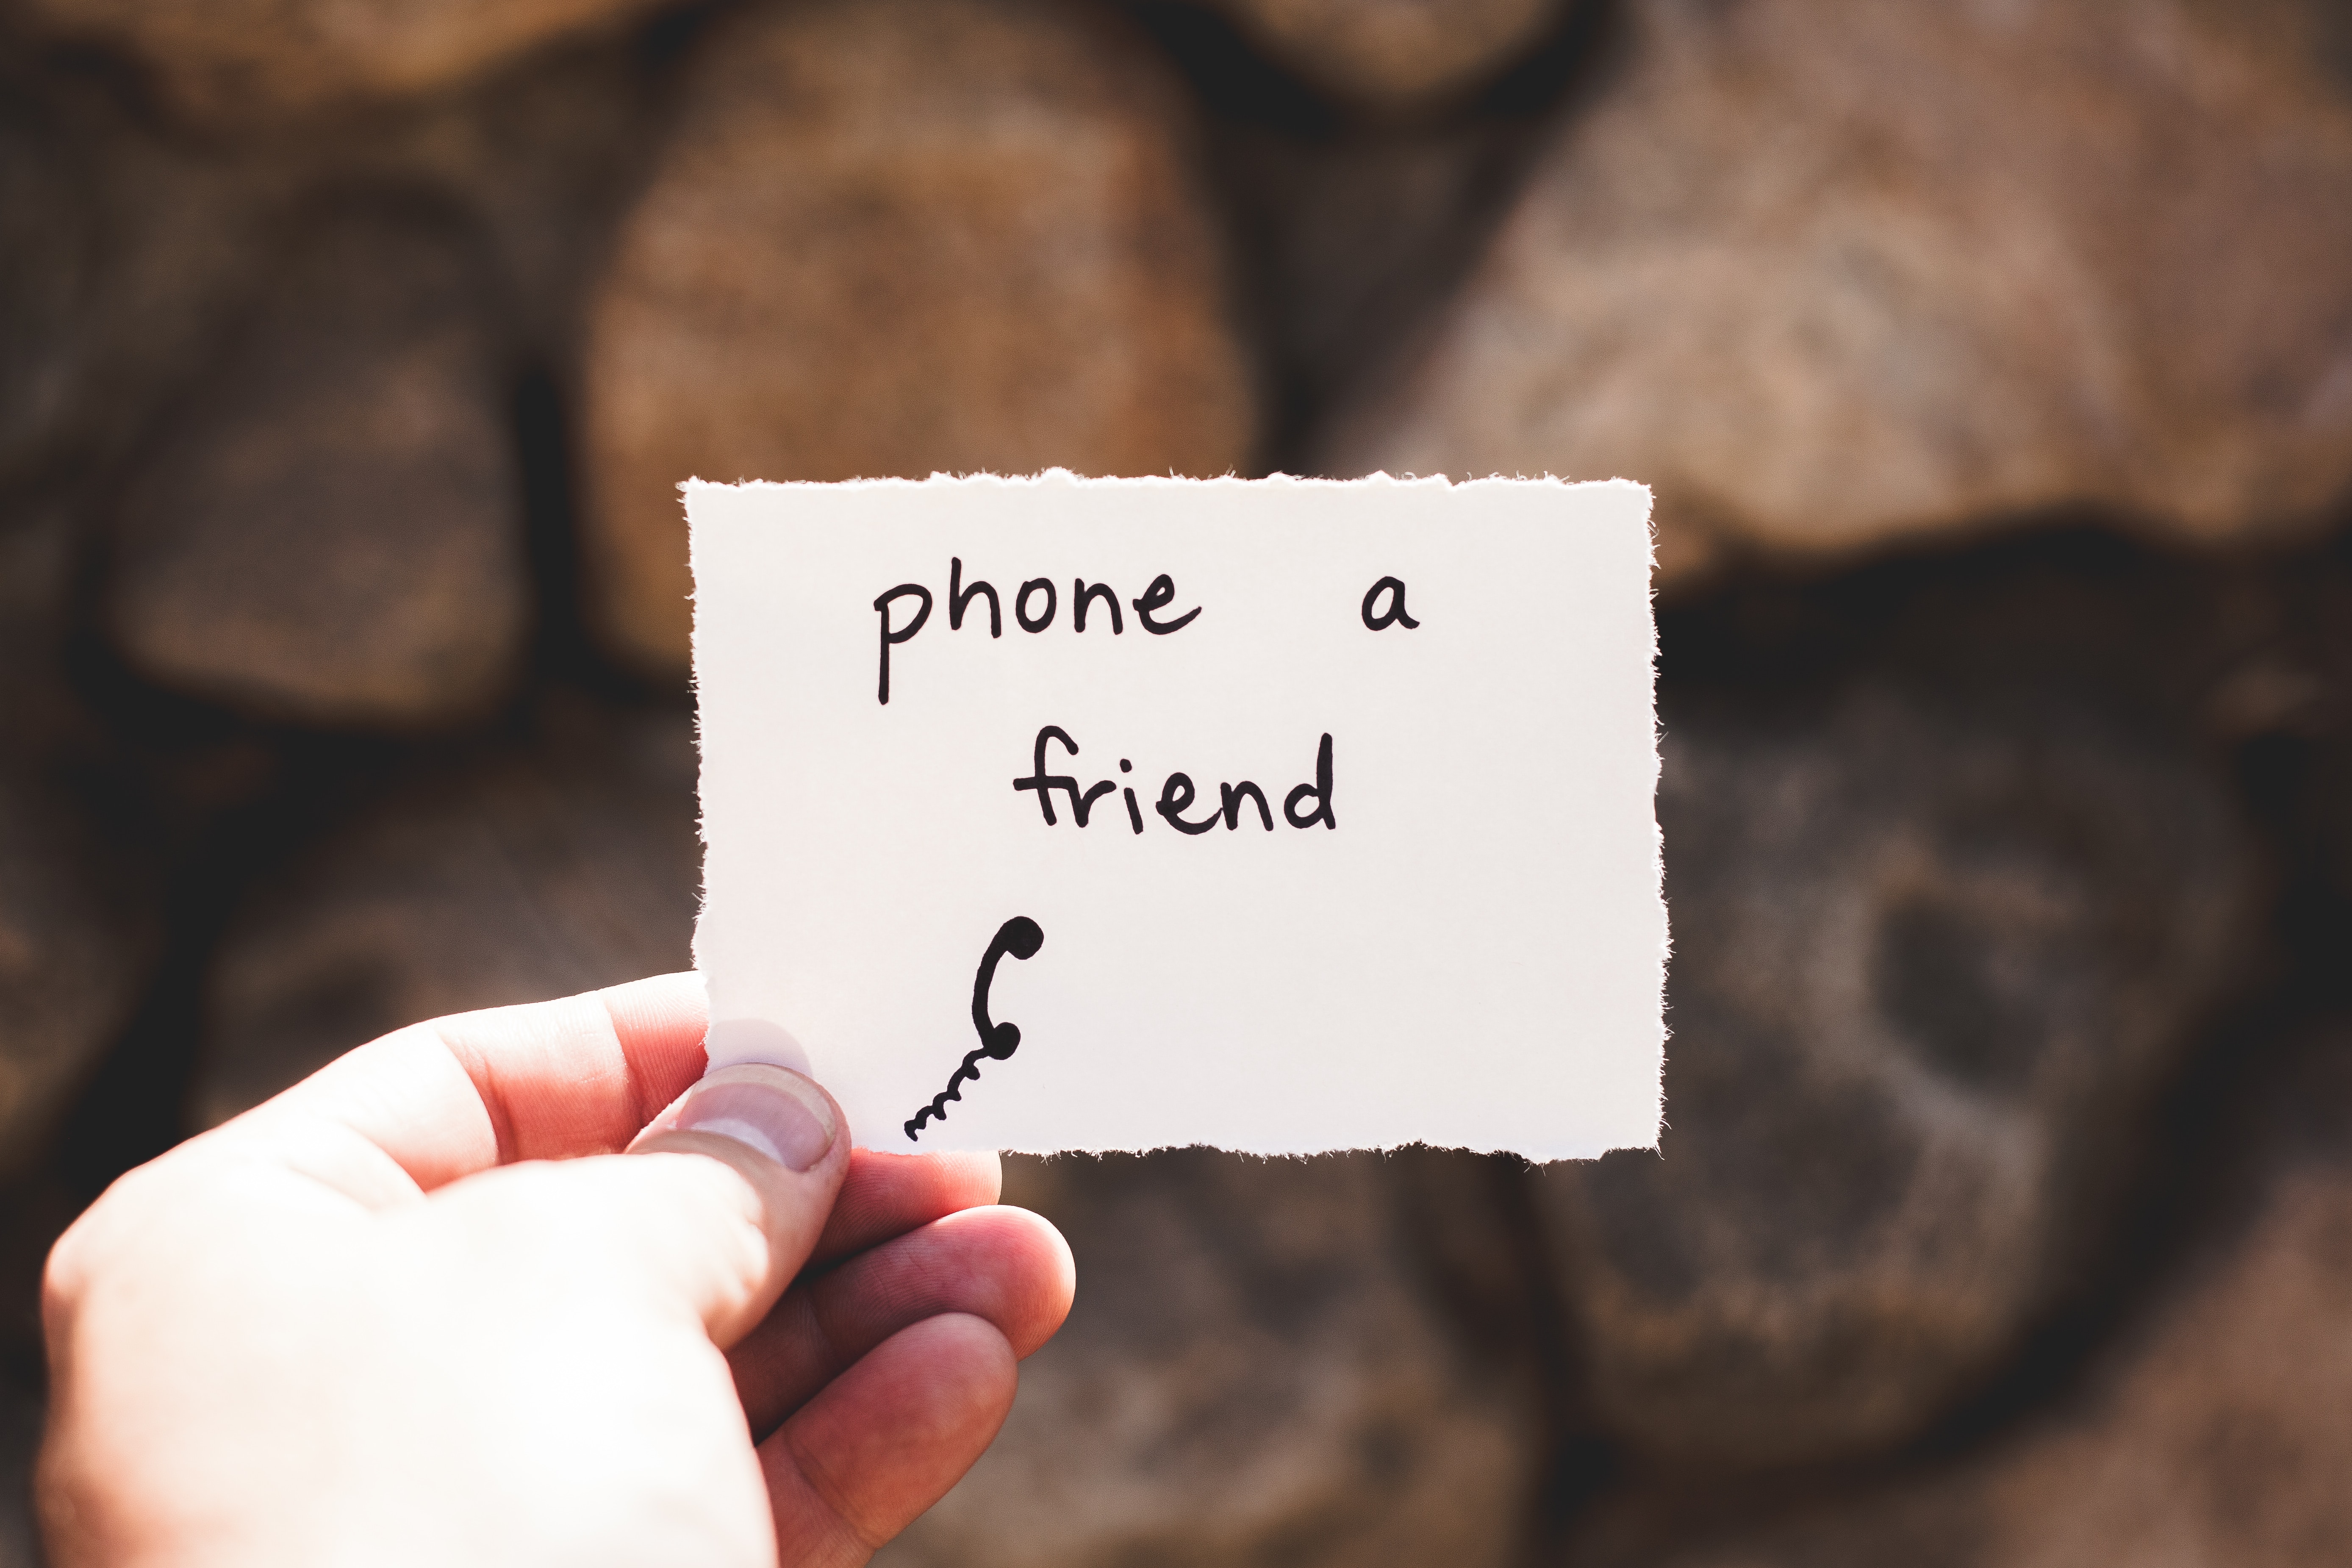 Hand holding a note that says "Phone a friend"